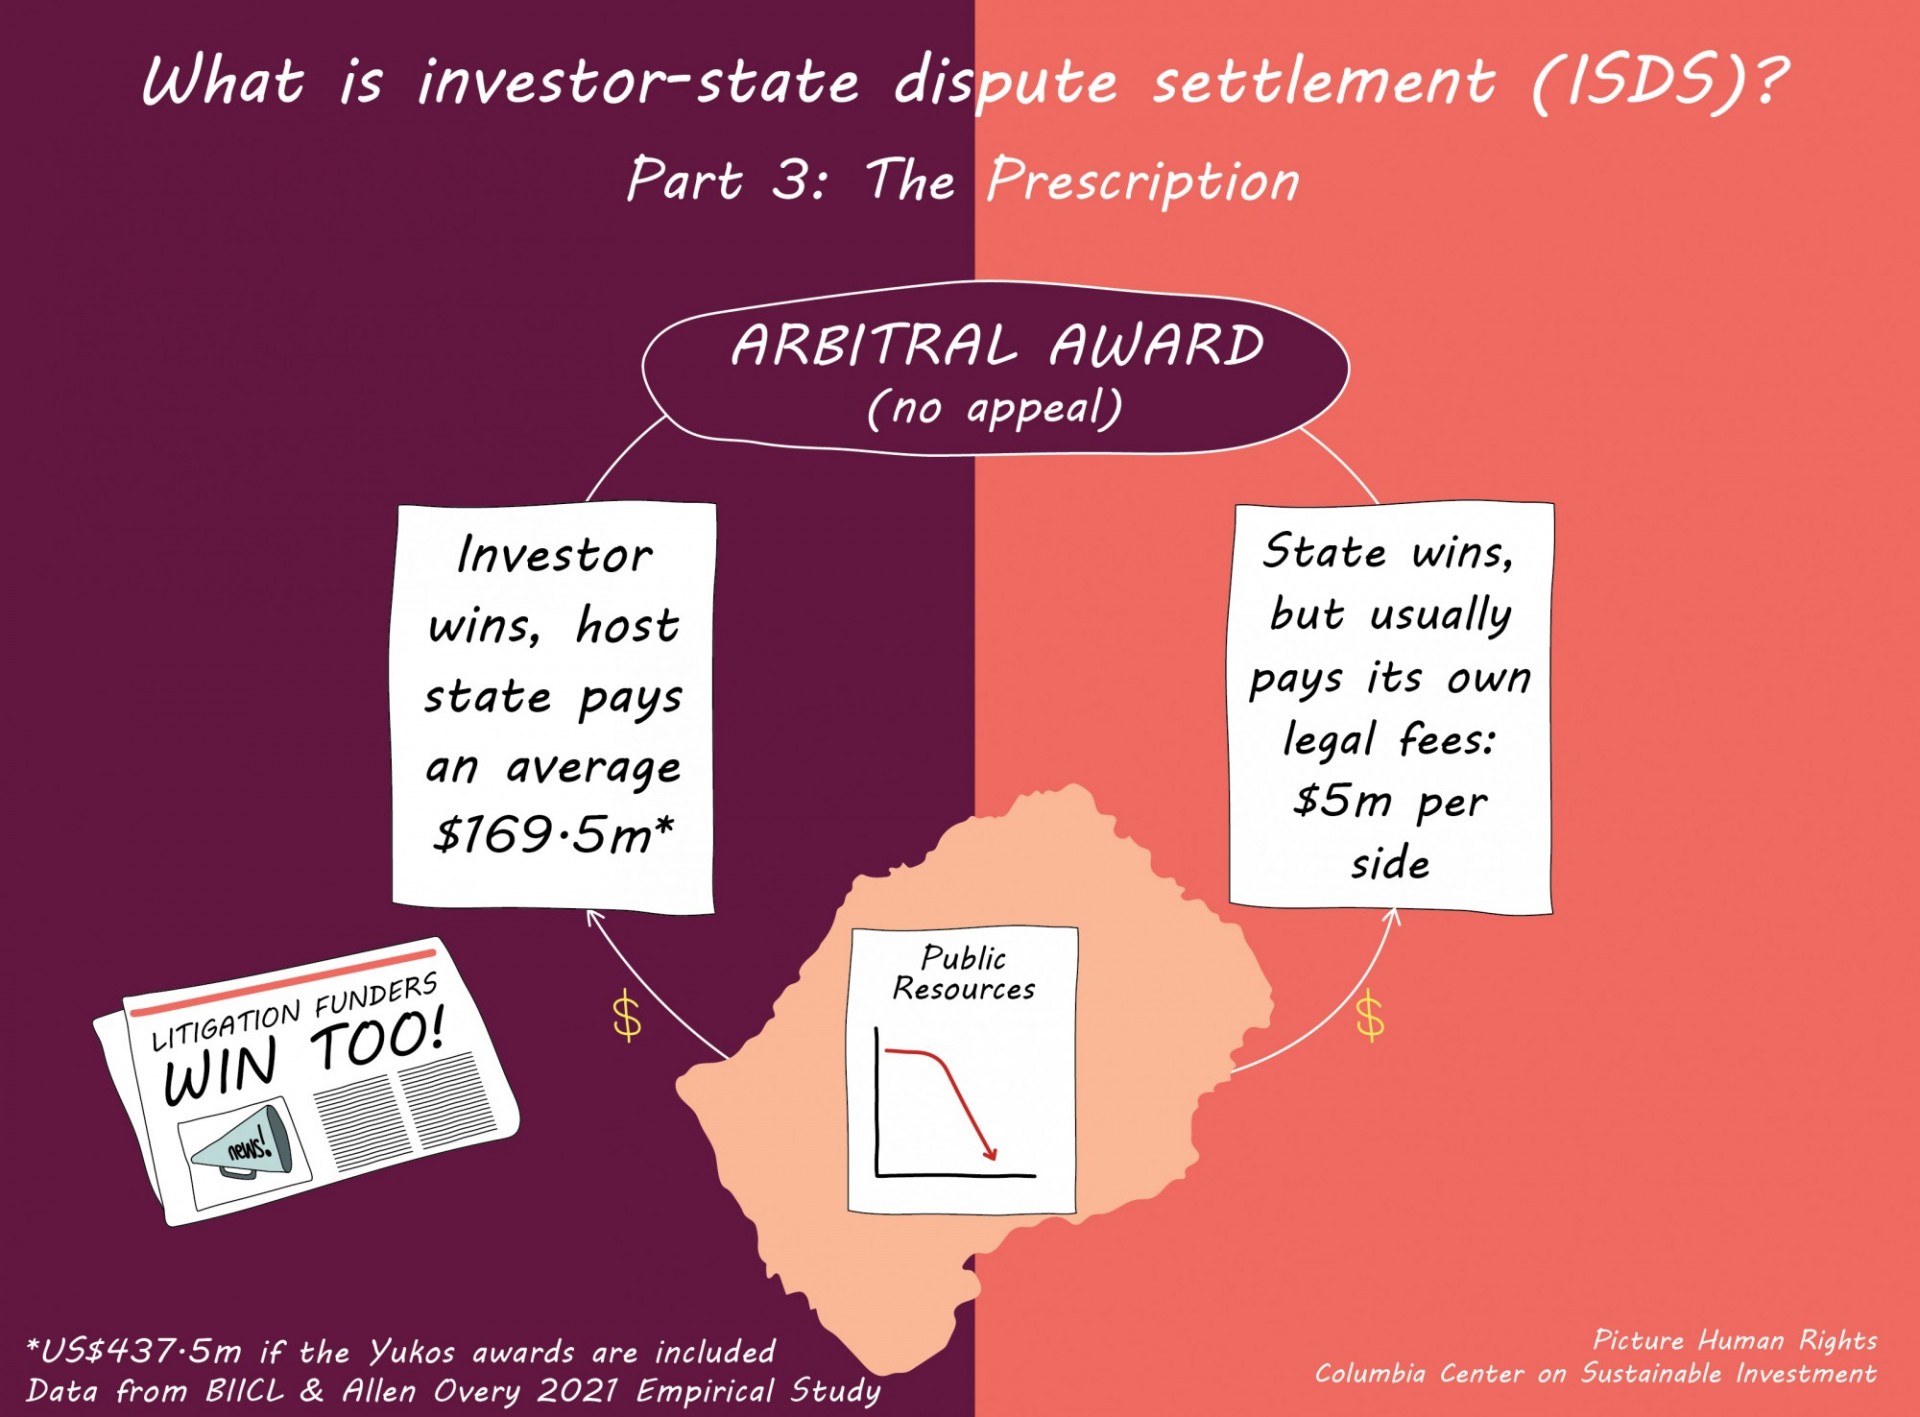 Graphic titled "What is investor-state dispute settlement (ISDS)? Part 3: The Prescription". It depicts a country a circular cycle graphic titled "Arbitral Award (no appeal)" with "Investor wins, host state pays an average $169.5m" and "State wins, but usually pays its own legal fees: $5m per side" on either side. At the bottom of the cycle is a graphic titled Public Resources that shows a falling red arrow.